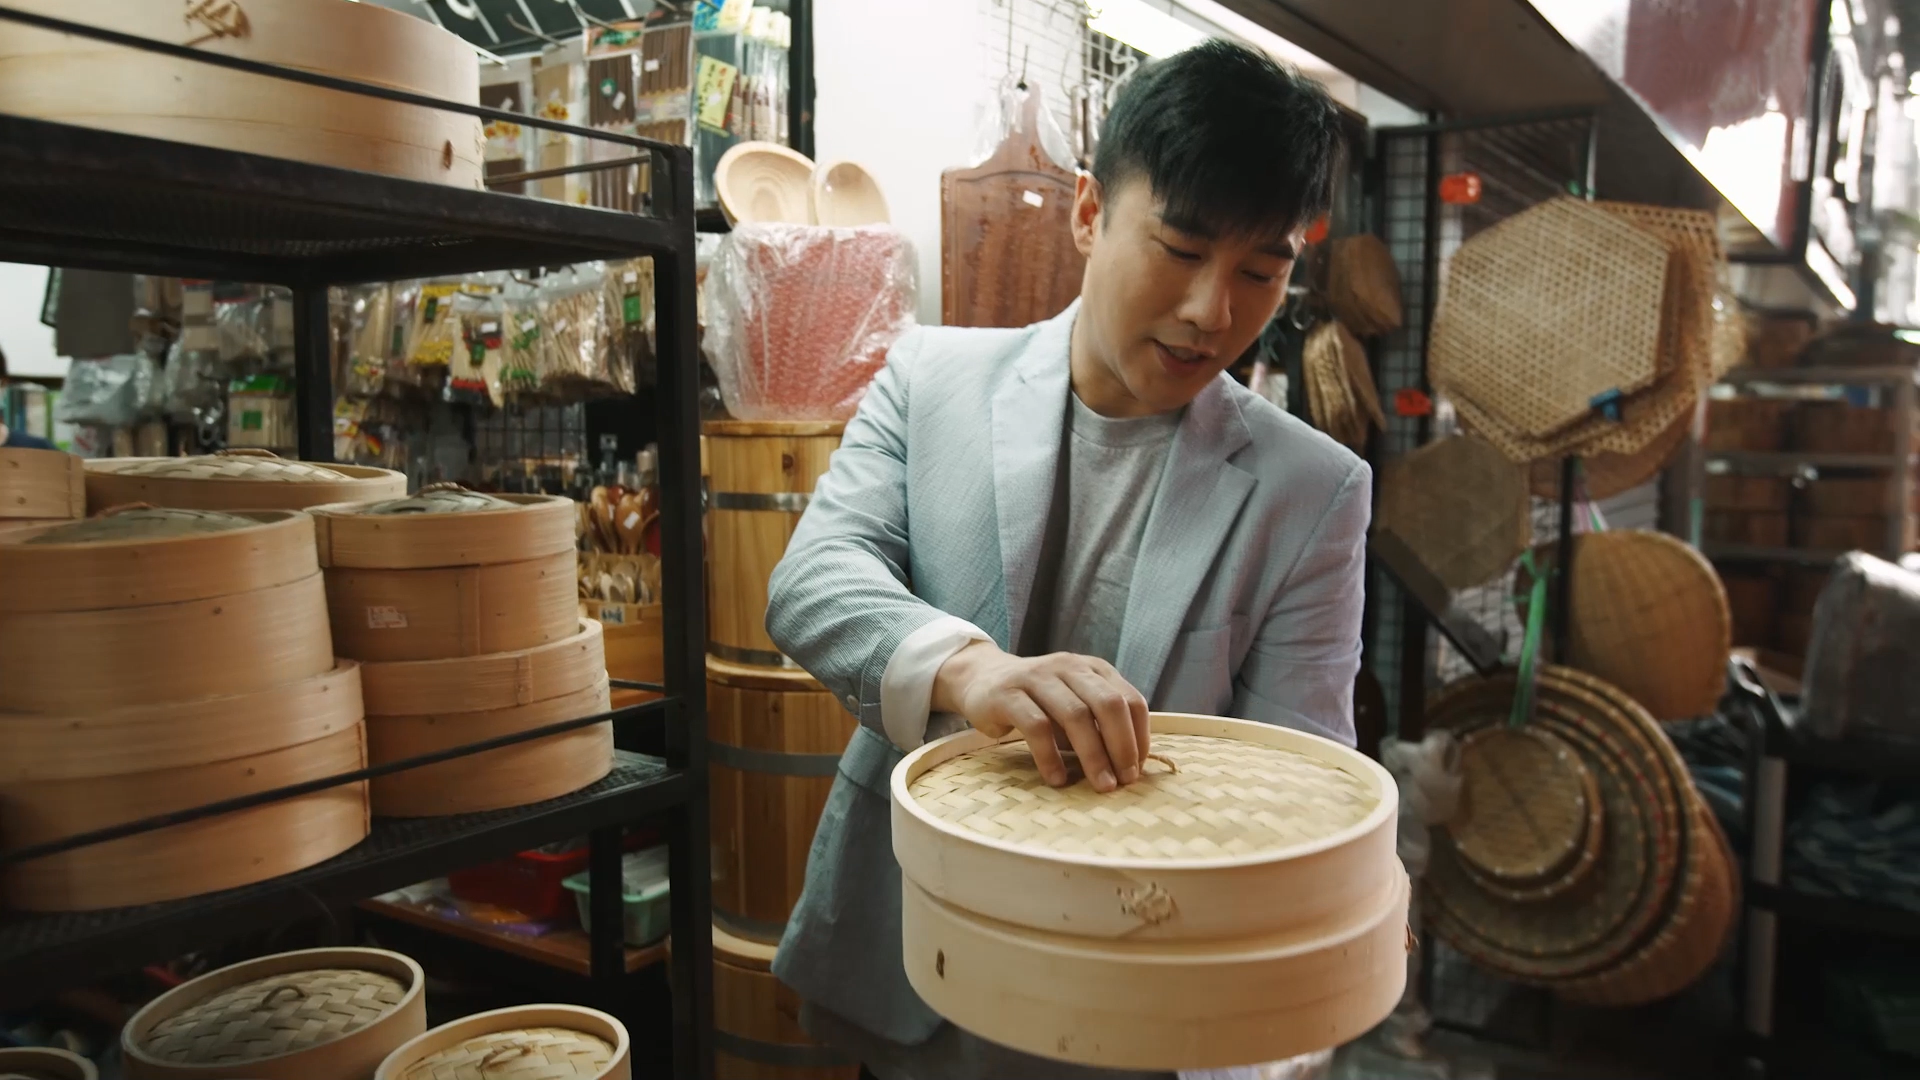 Renowned Hong Kong magician Louis Yan features bamboo steamers (above) and other items associated with the city’s traditional meal of dim sum – assorted steamed or fried savoury dumplings – in his performances.